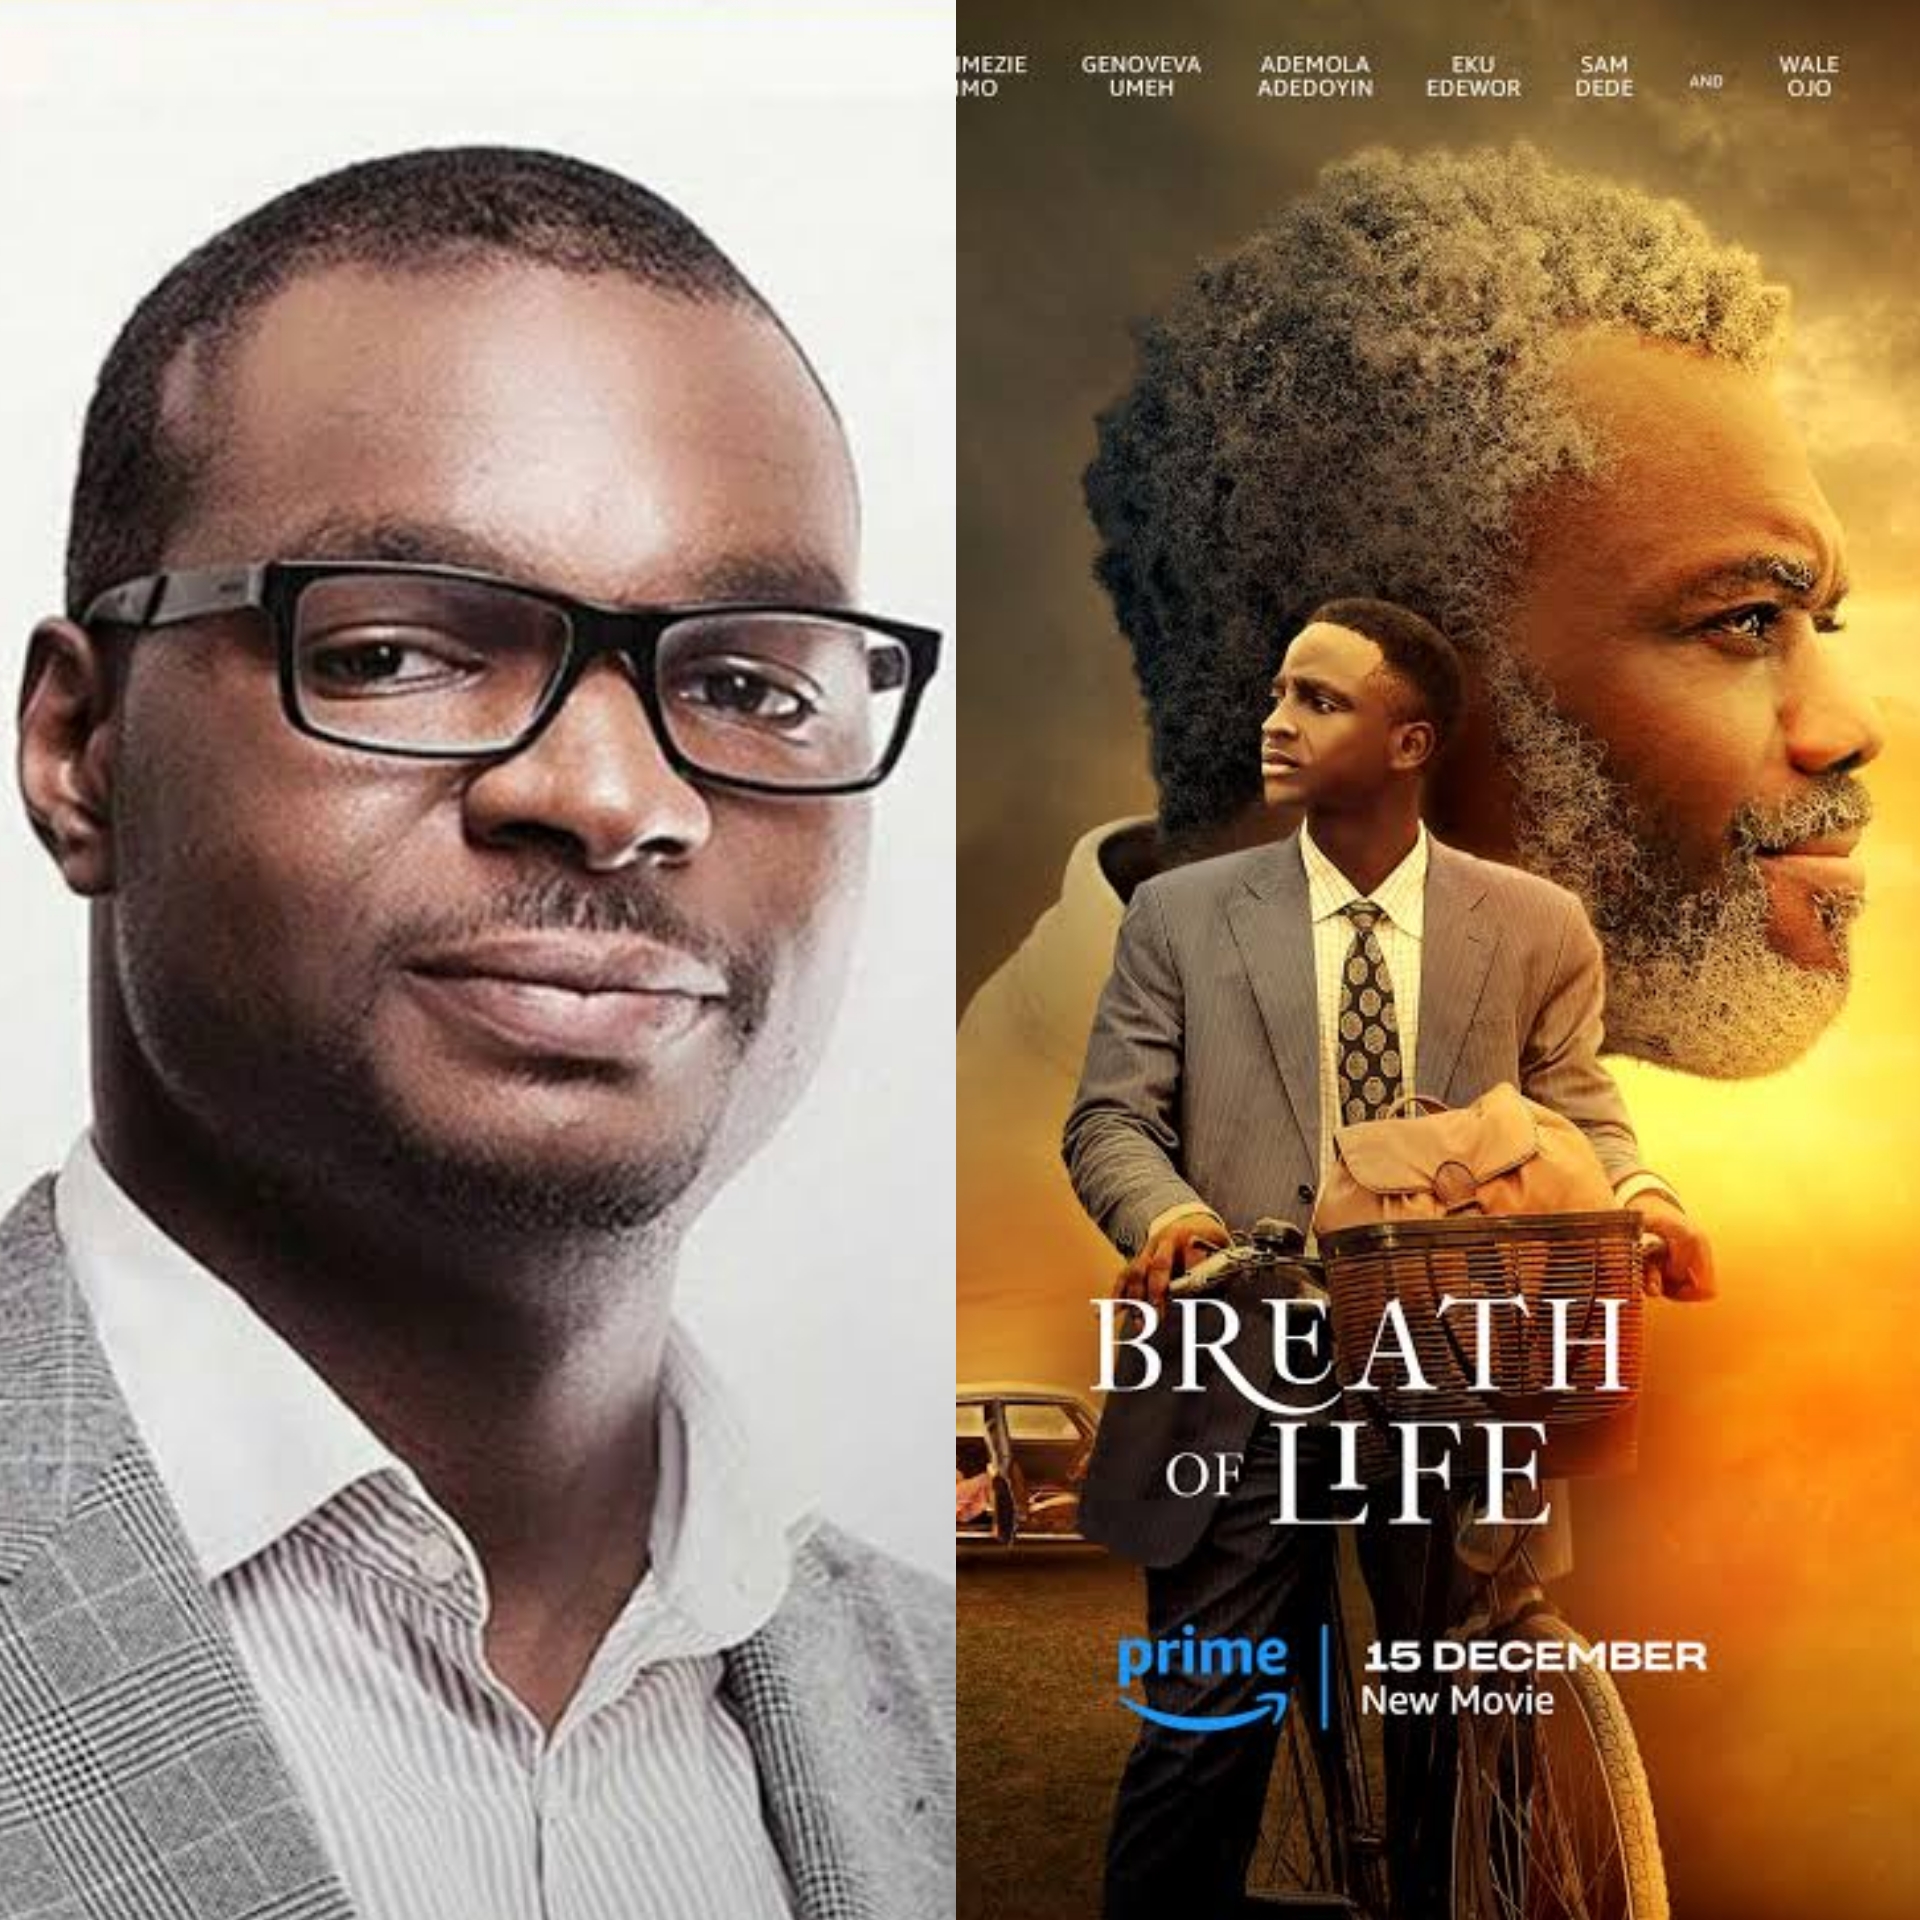 The Bts Photos And Trailer For The Highly Anticipated Bb Sasore-Directed Film “Breath Of Life” Has Been Released, Yours Truly, News, May 19, 2024